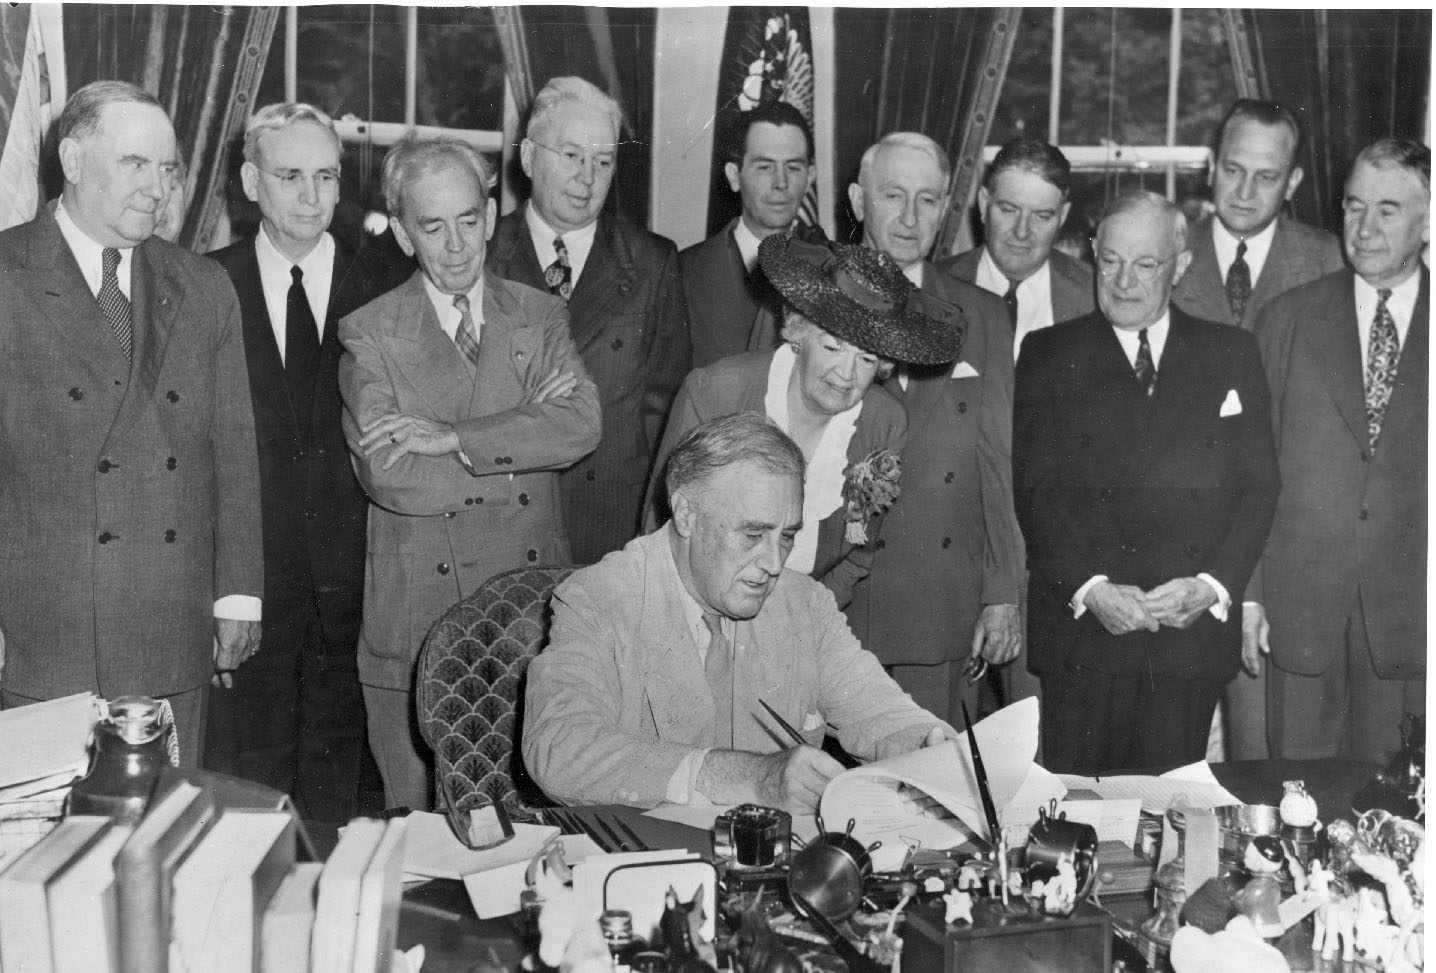 Edith Rogers leans in as President Franklin Roosevelt signs the GI Bill on June 22, 1944. Moments later, Roosevelt handed her the signing pen as a token of appreciation for her co-sponsorship of the bill. President Roosevelt is sitting in the Oval Office, Rogers directly behind him standing, with a group of 10 men behind her. (FDR Library)